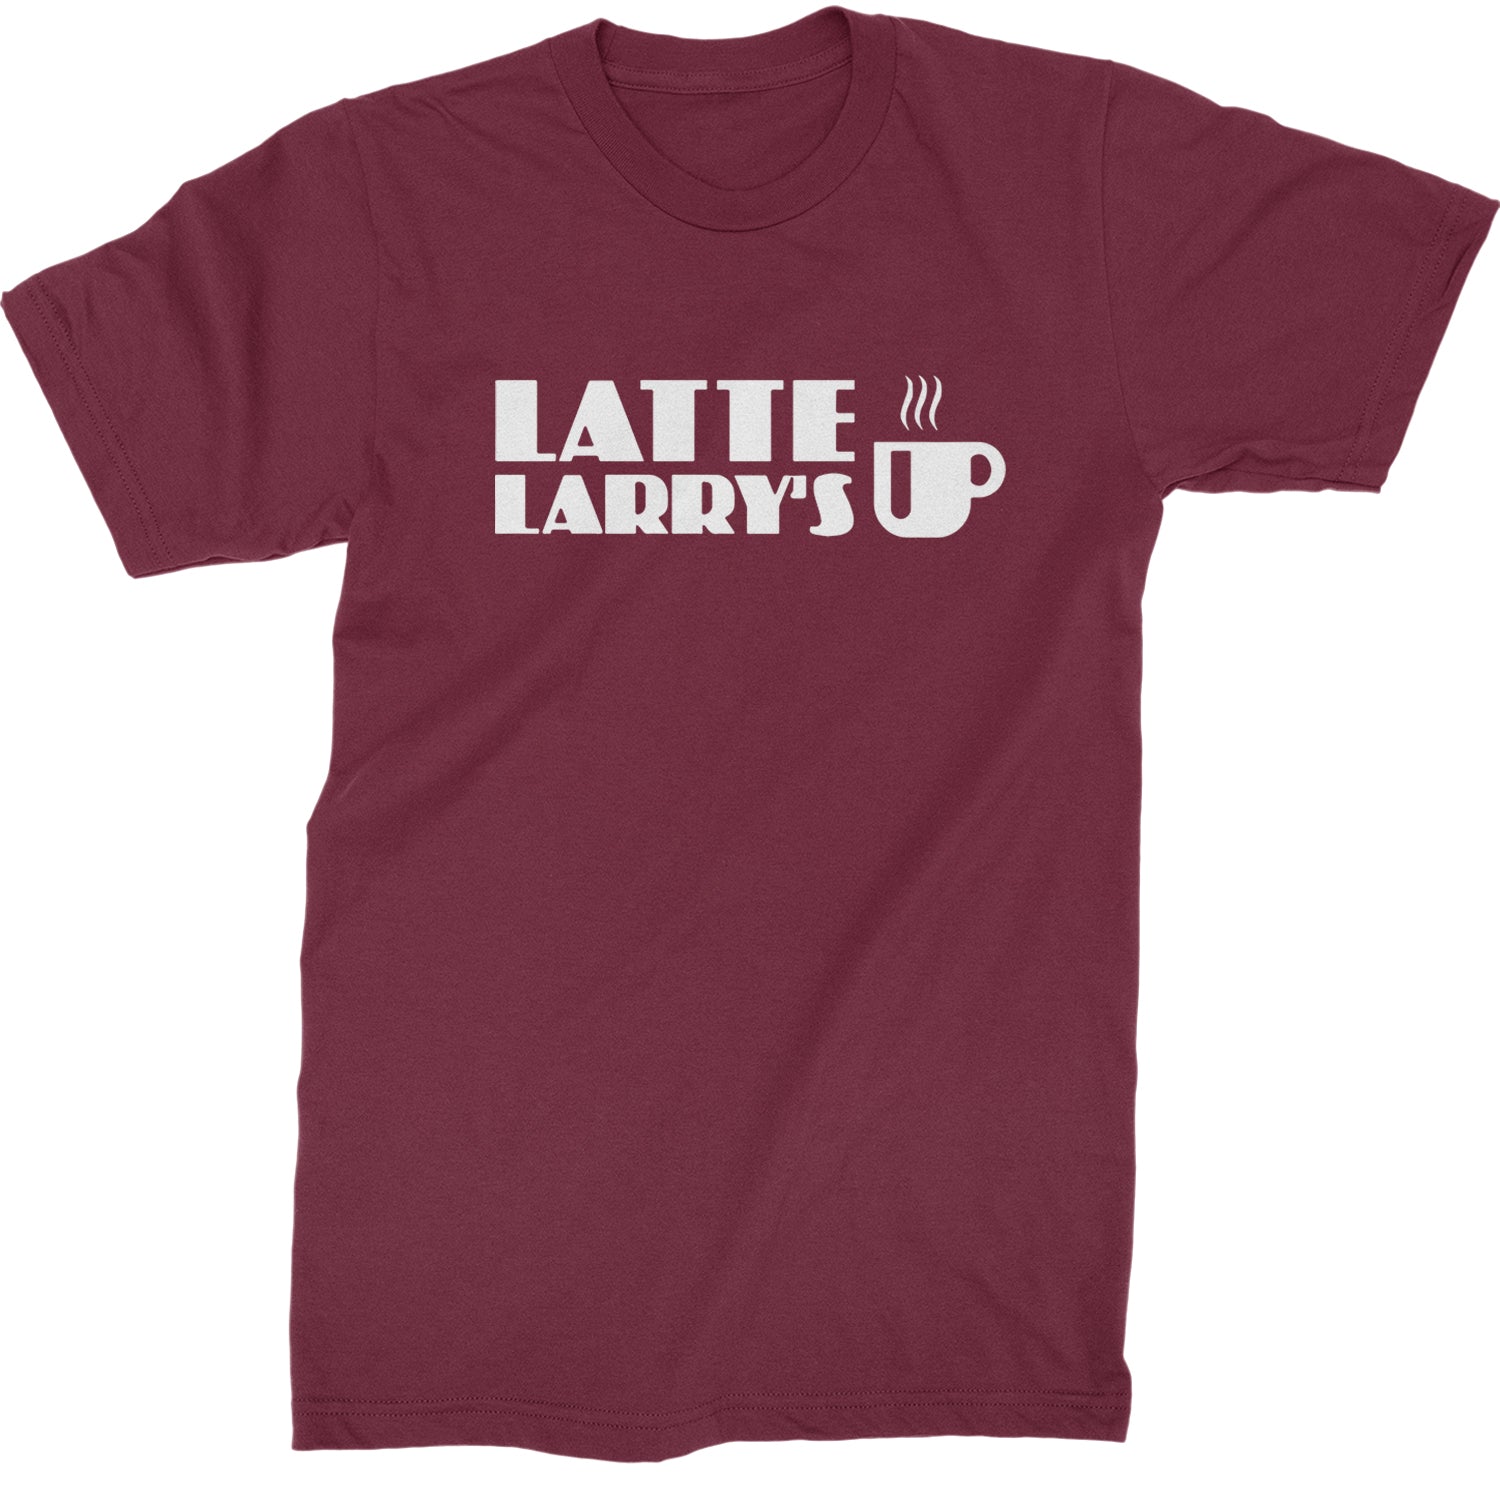 Latte Larry's Enthusiastic Coffee Mens T-shirt Maroon